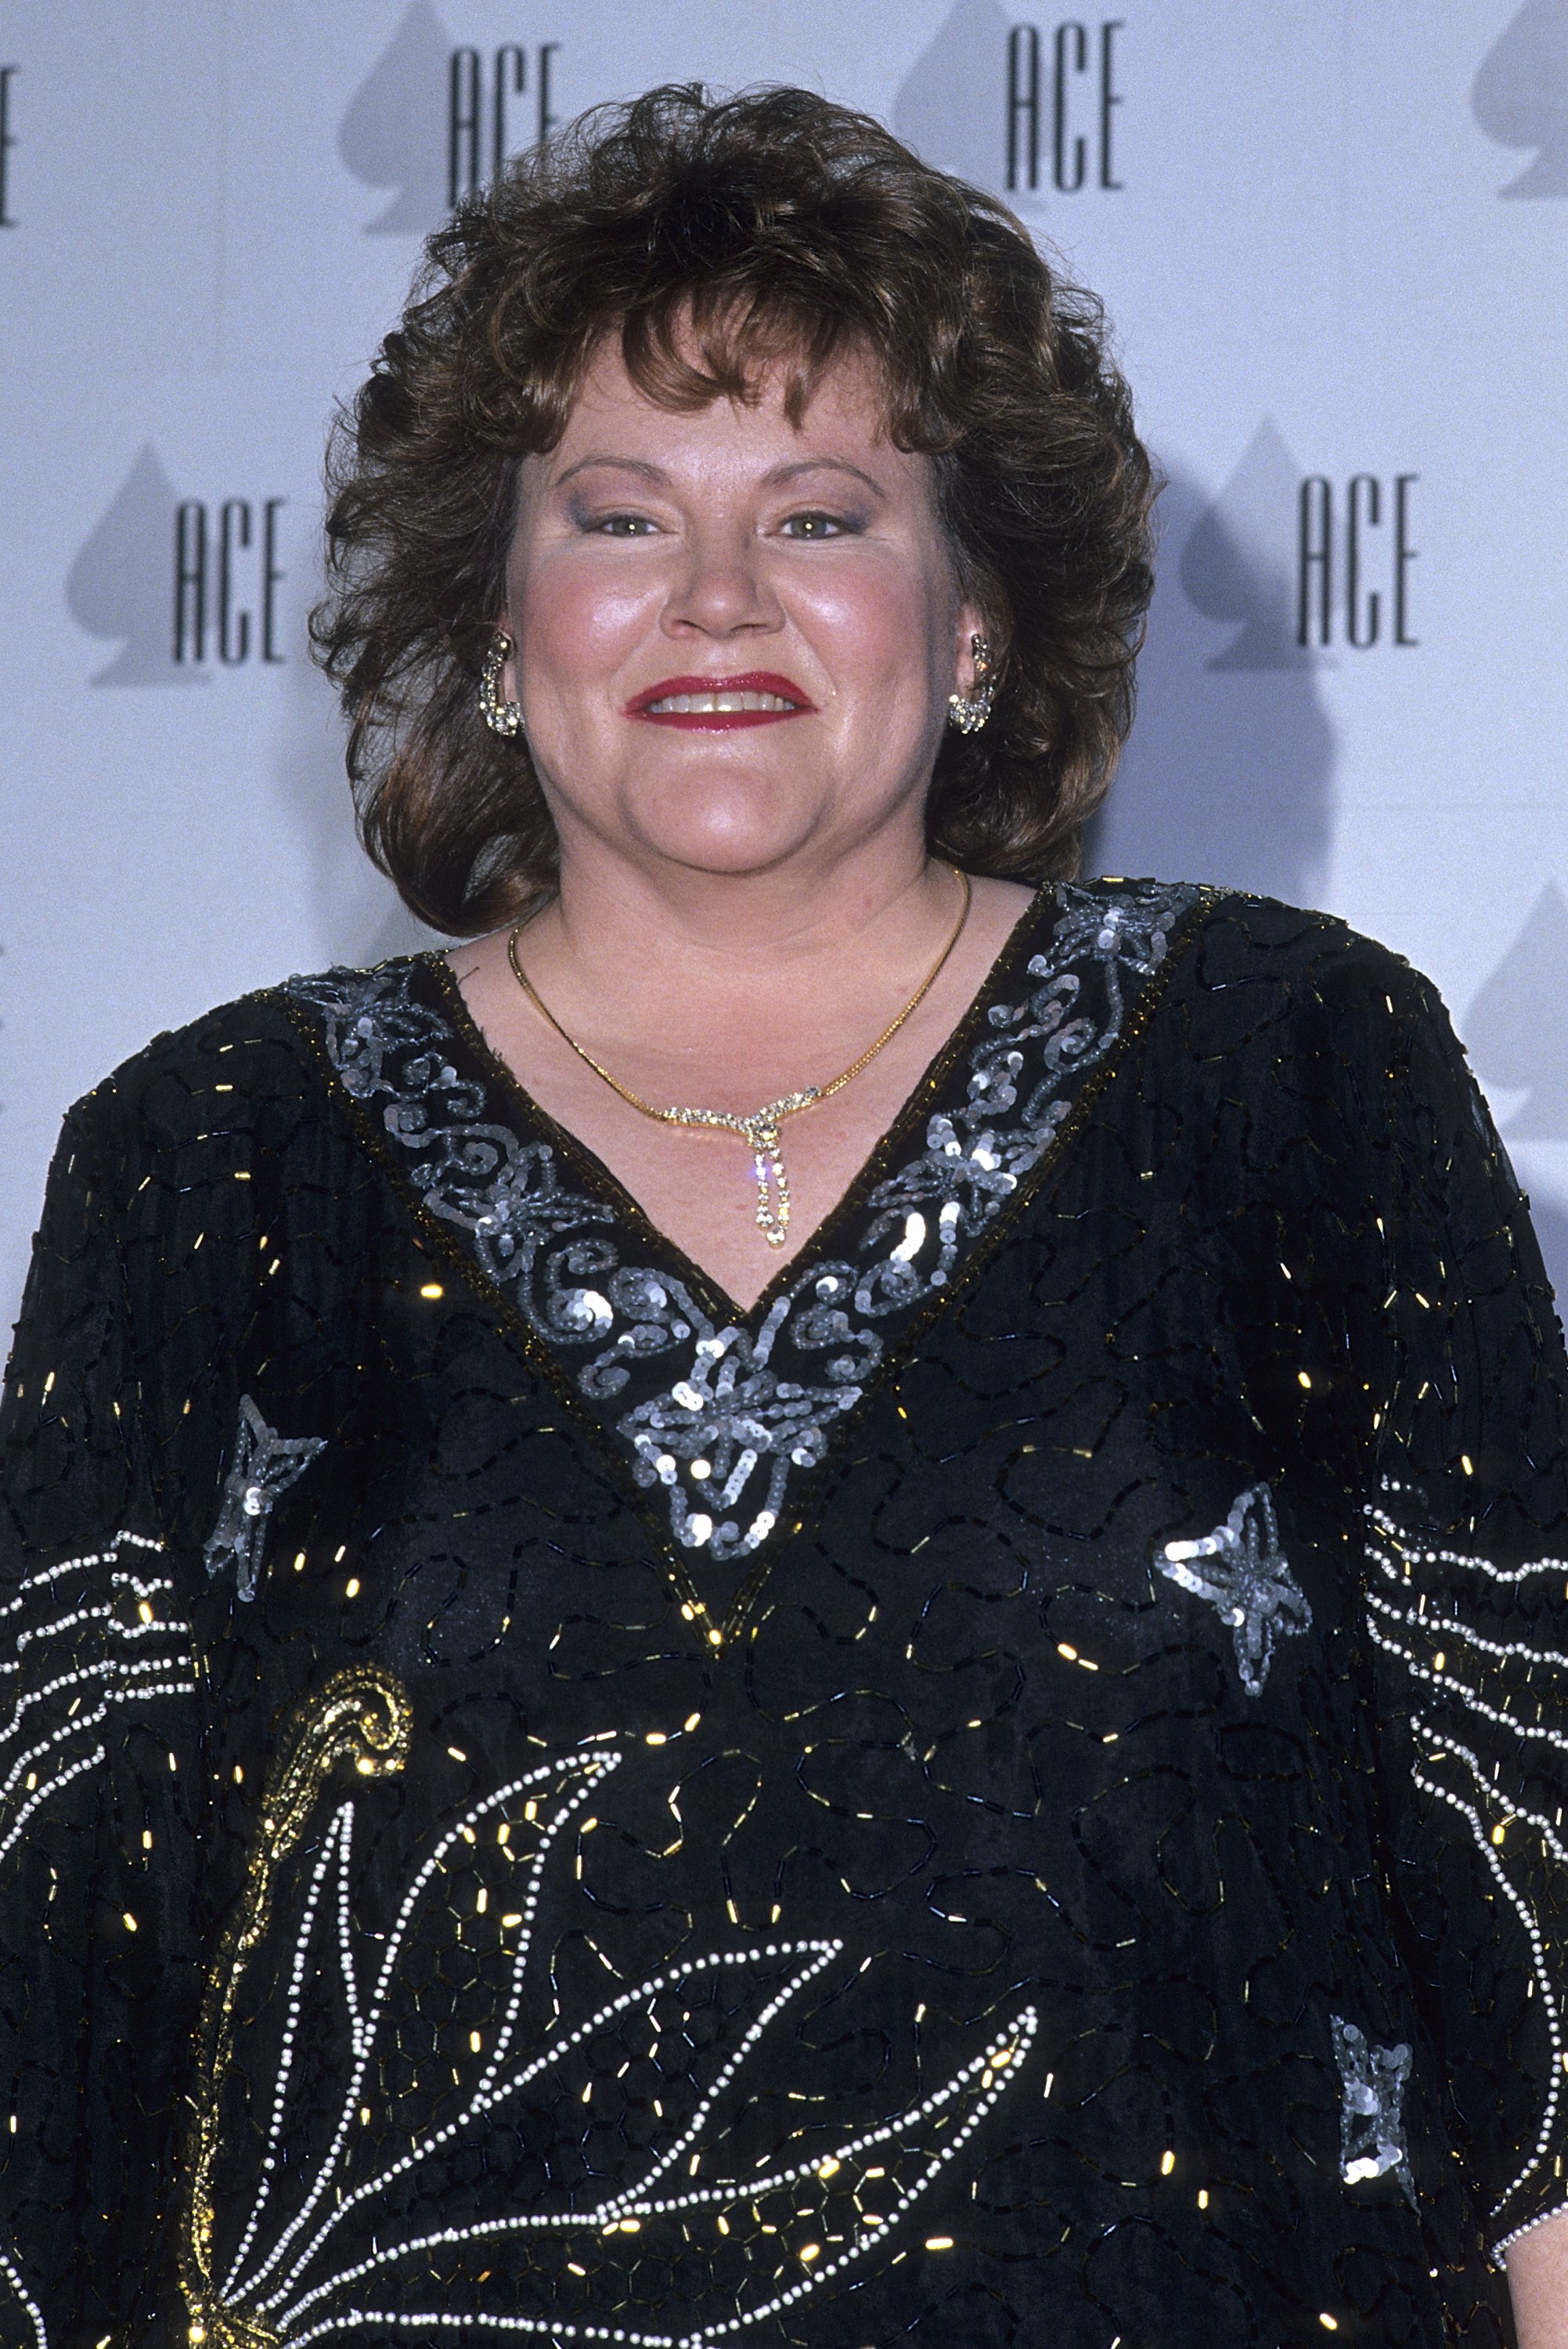  Actress Edie McClurg attends the 11th Annual CableACE Awards on January 14, 1990 at the Wiltern Theatre in Los Angeles, California. | Source: Getty Images